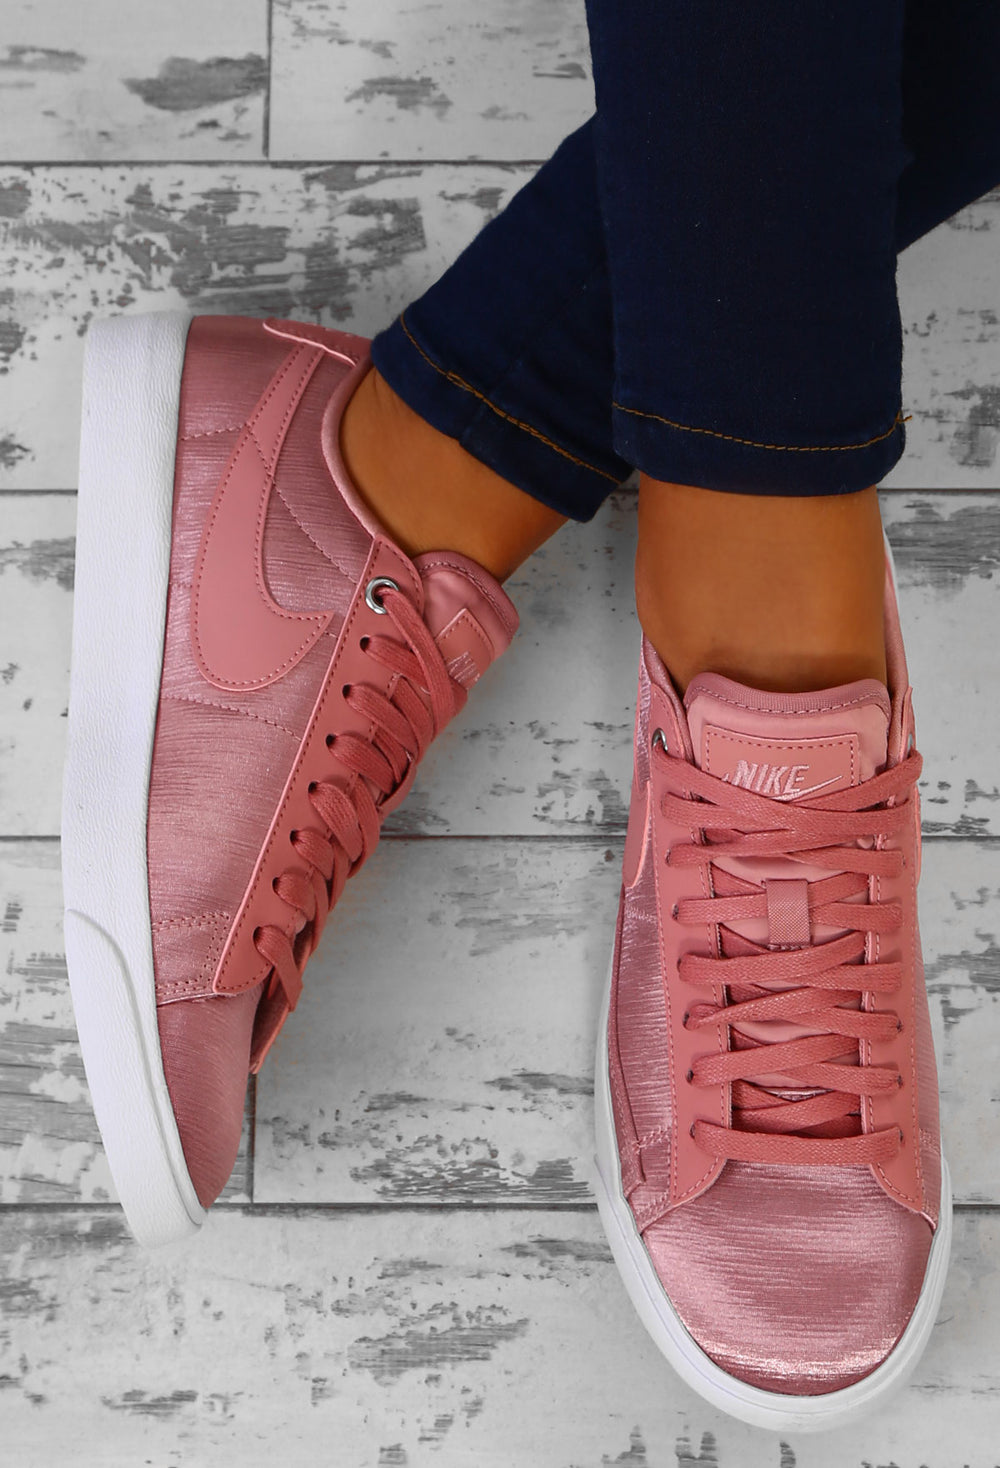 red and pink trainers